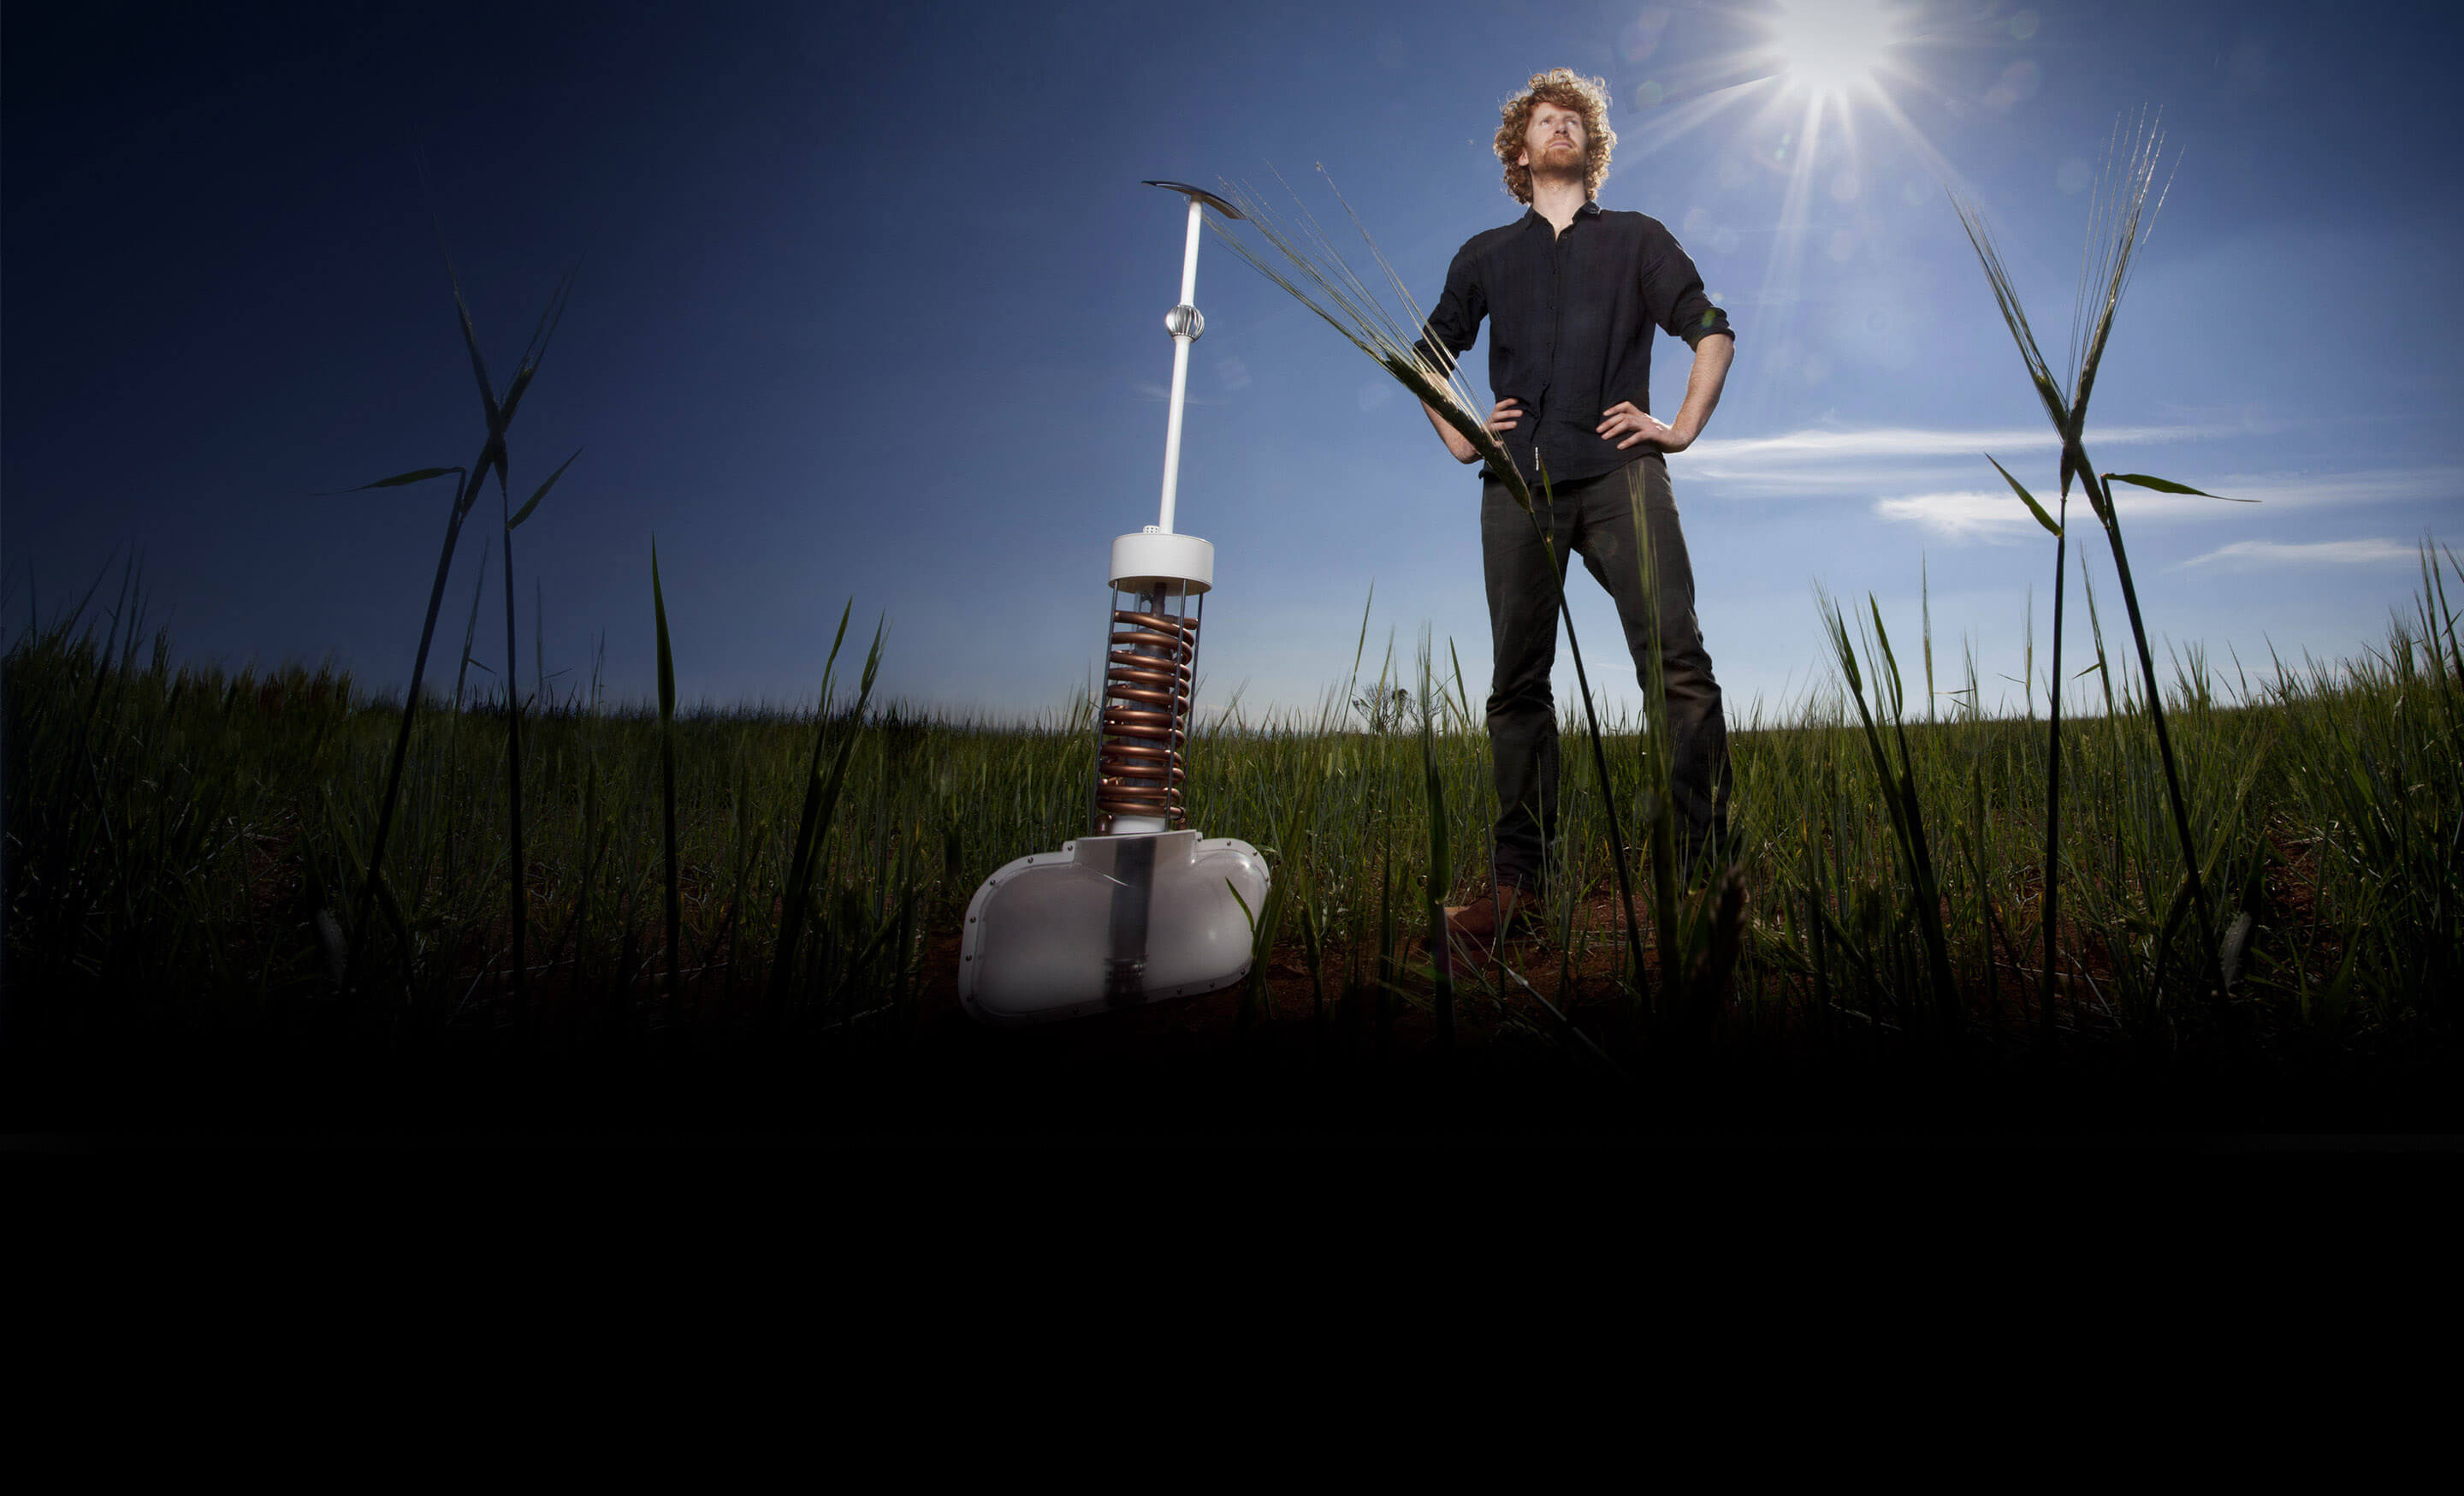 2011 international winner of the James Dyson Award, Edward Linacre, with his invention Airdrop